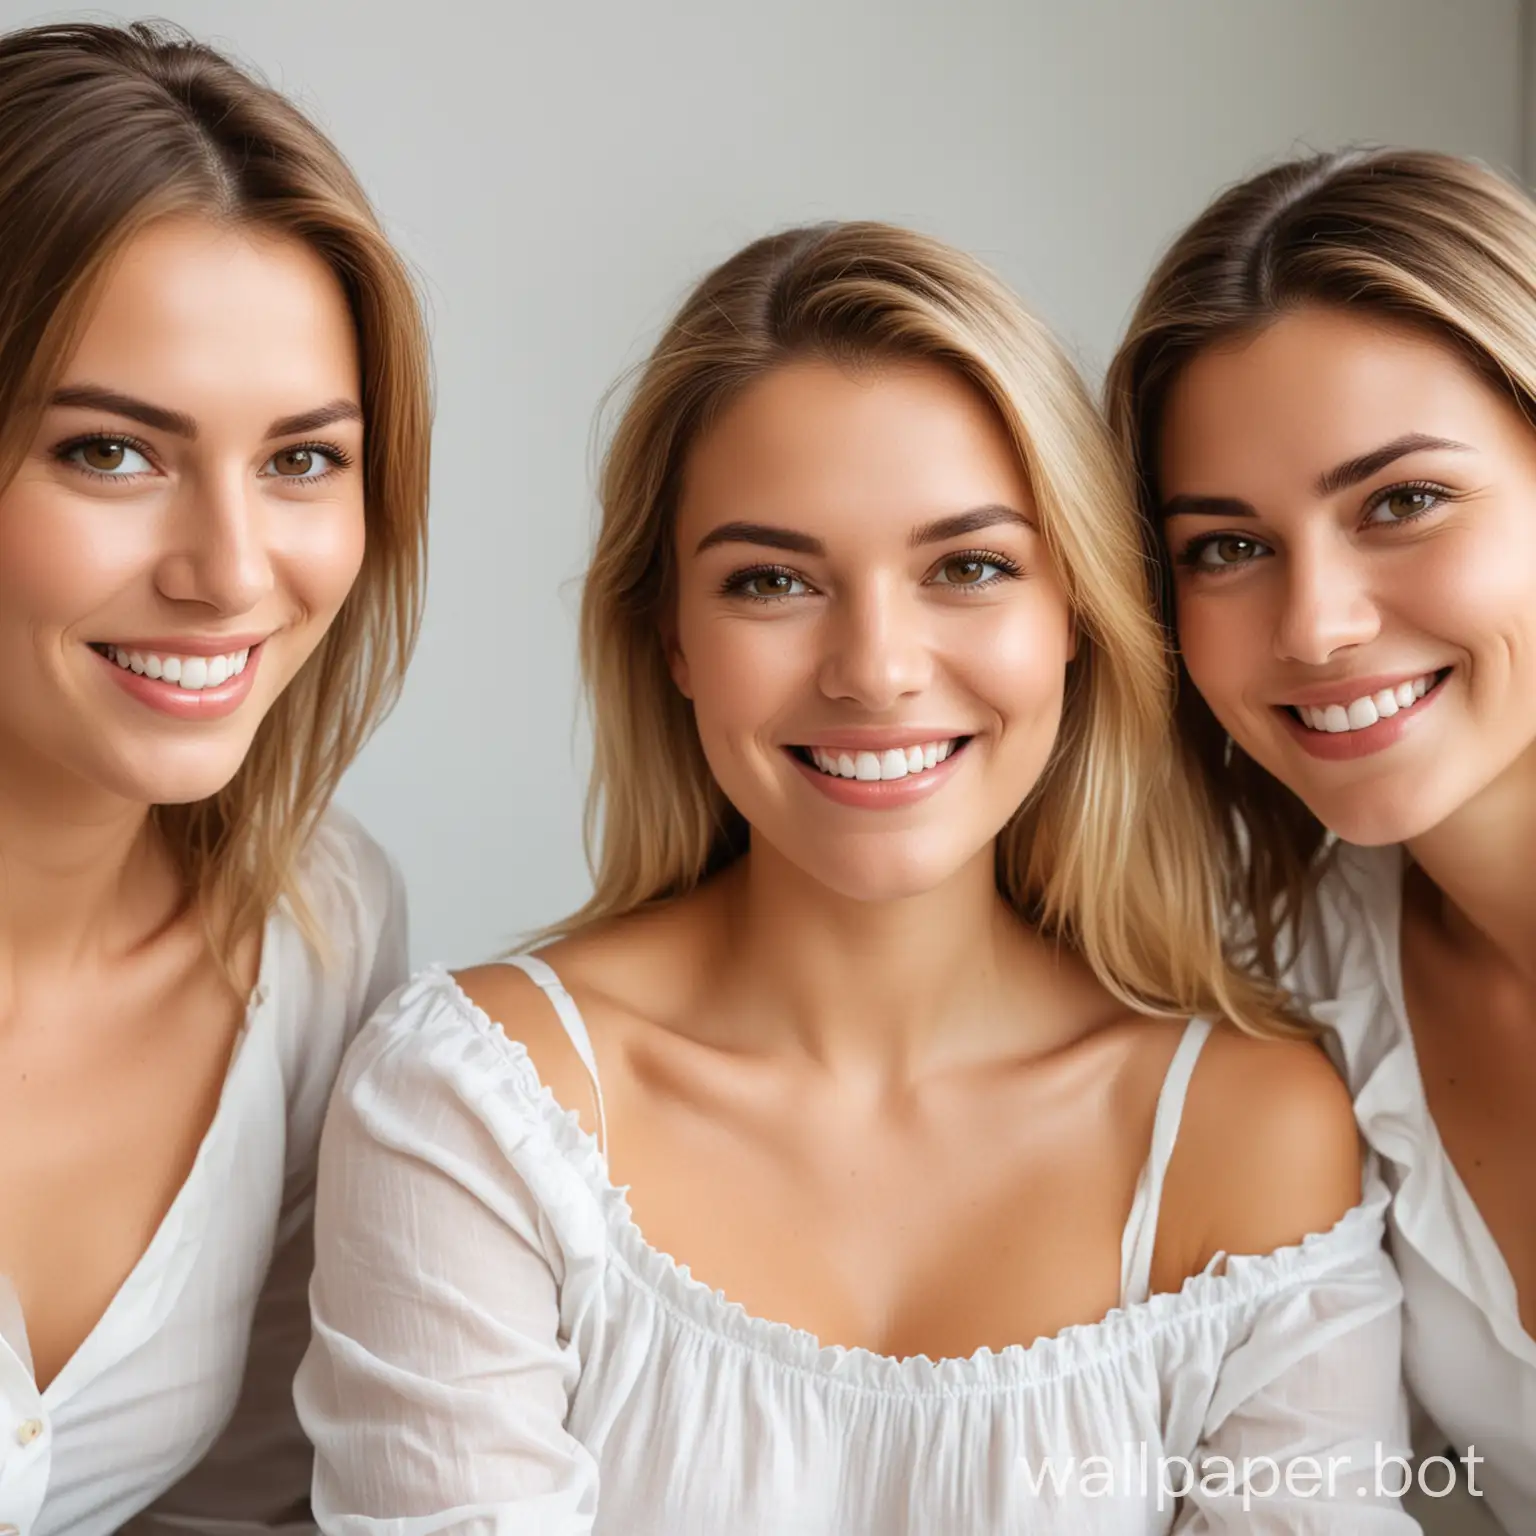 The Very same beautiful woman with blond hair and medium sized breasts wearing a plain white blouse smiling  sitting next to 2 other women with brown hair who are also smiling with clear view of a
ll faces